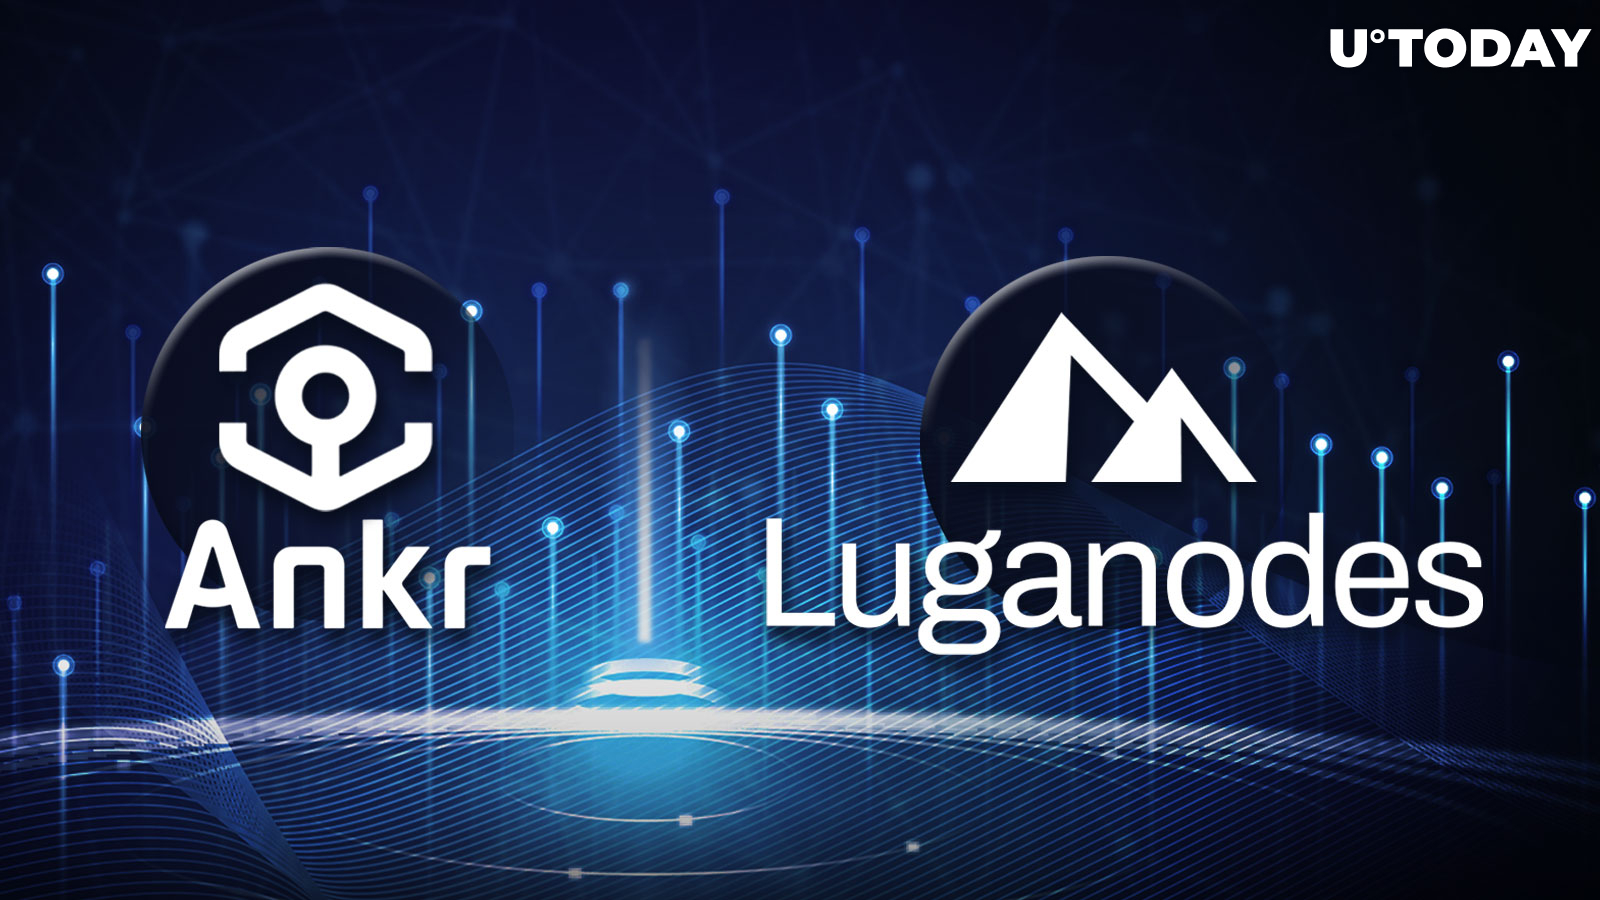 Ankr (ANKR) Partners with Staking Heavyweight Luganodes to Accelerate AppChain Development